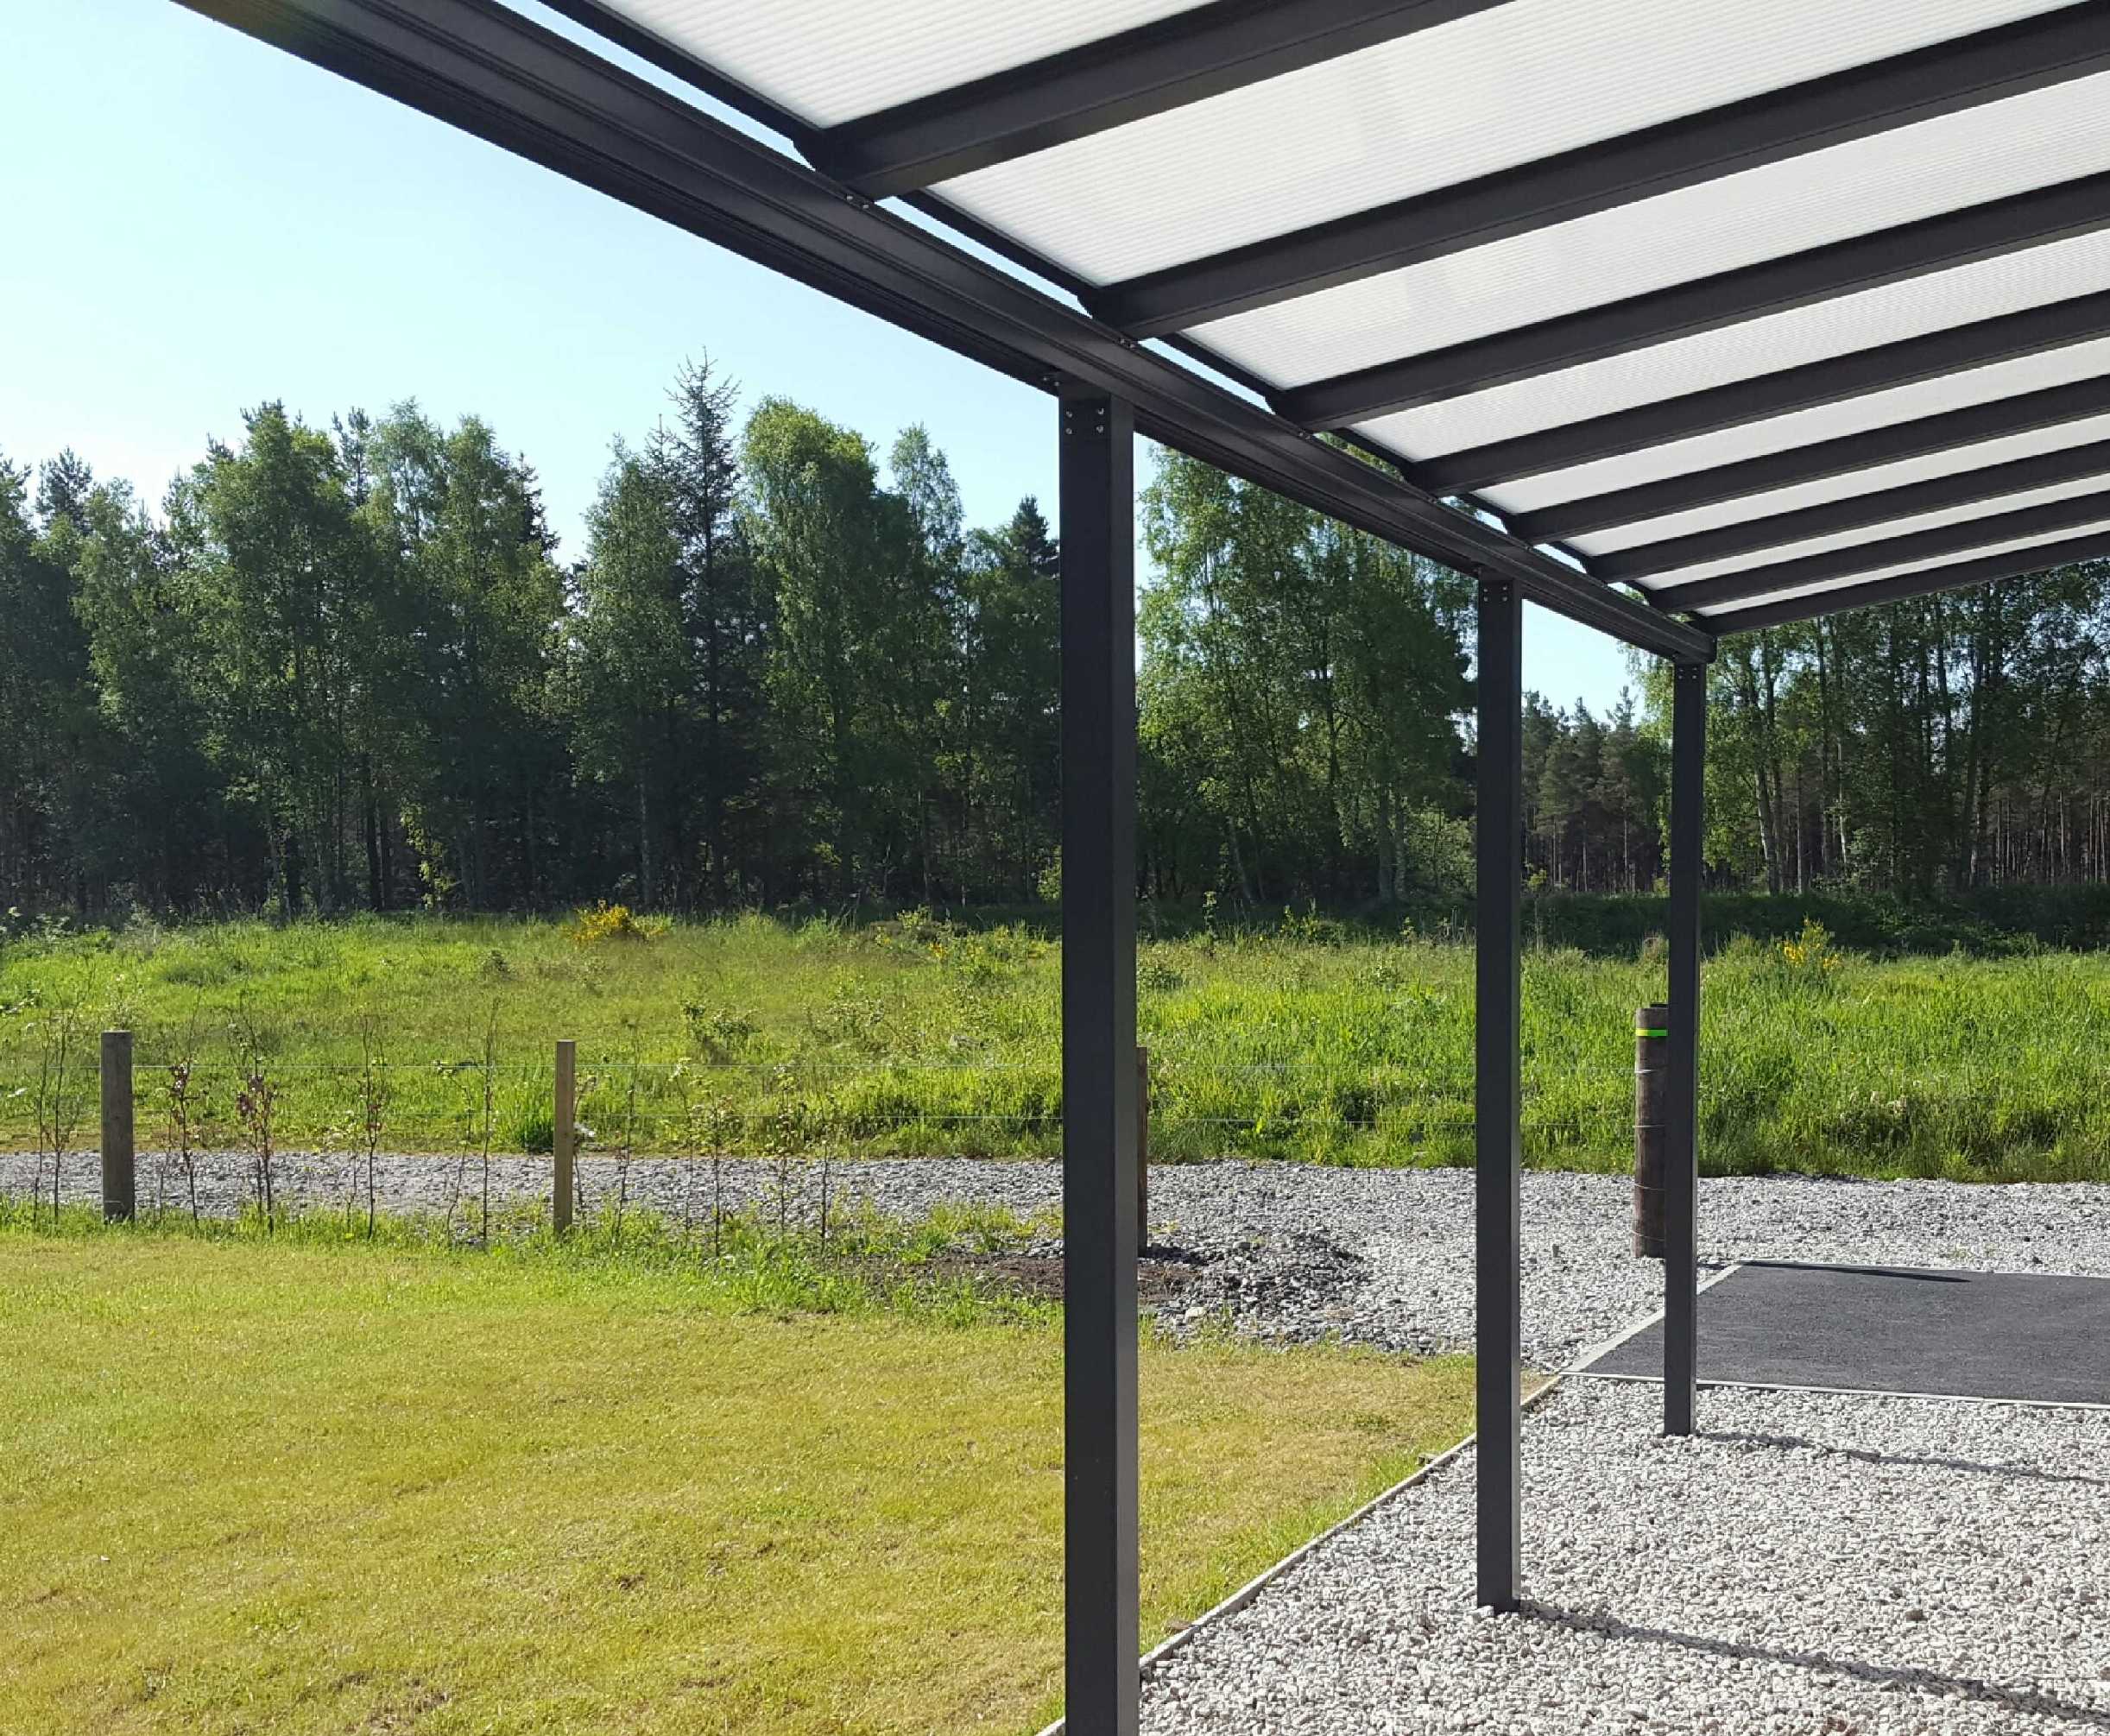 Omega Smart Lean-To Canopy, Anthracite Grey, UNGLAZED for 6mm Glazing - 3.5m (W) x 1.5m (P), (3) Supporting Posts